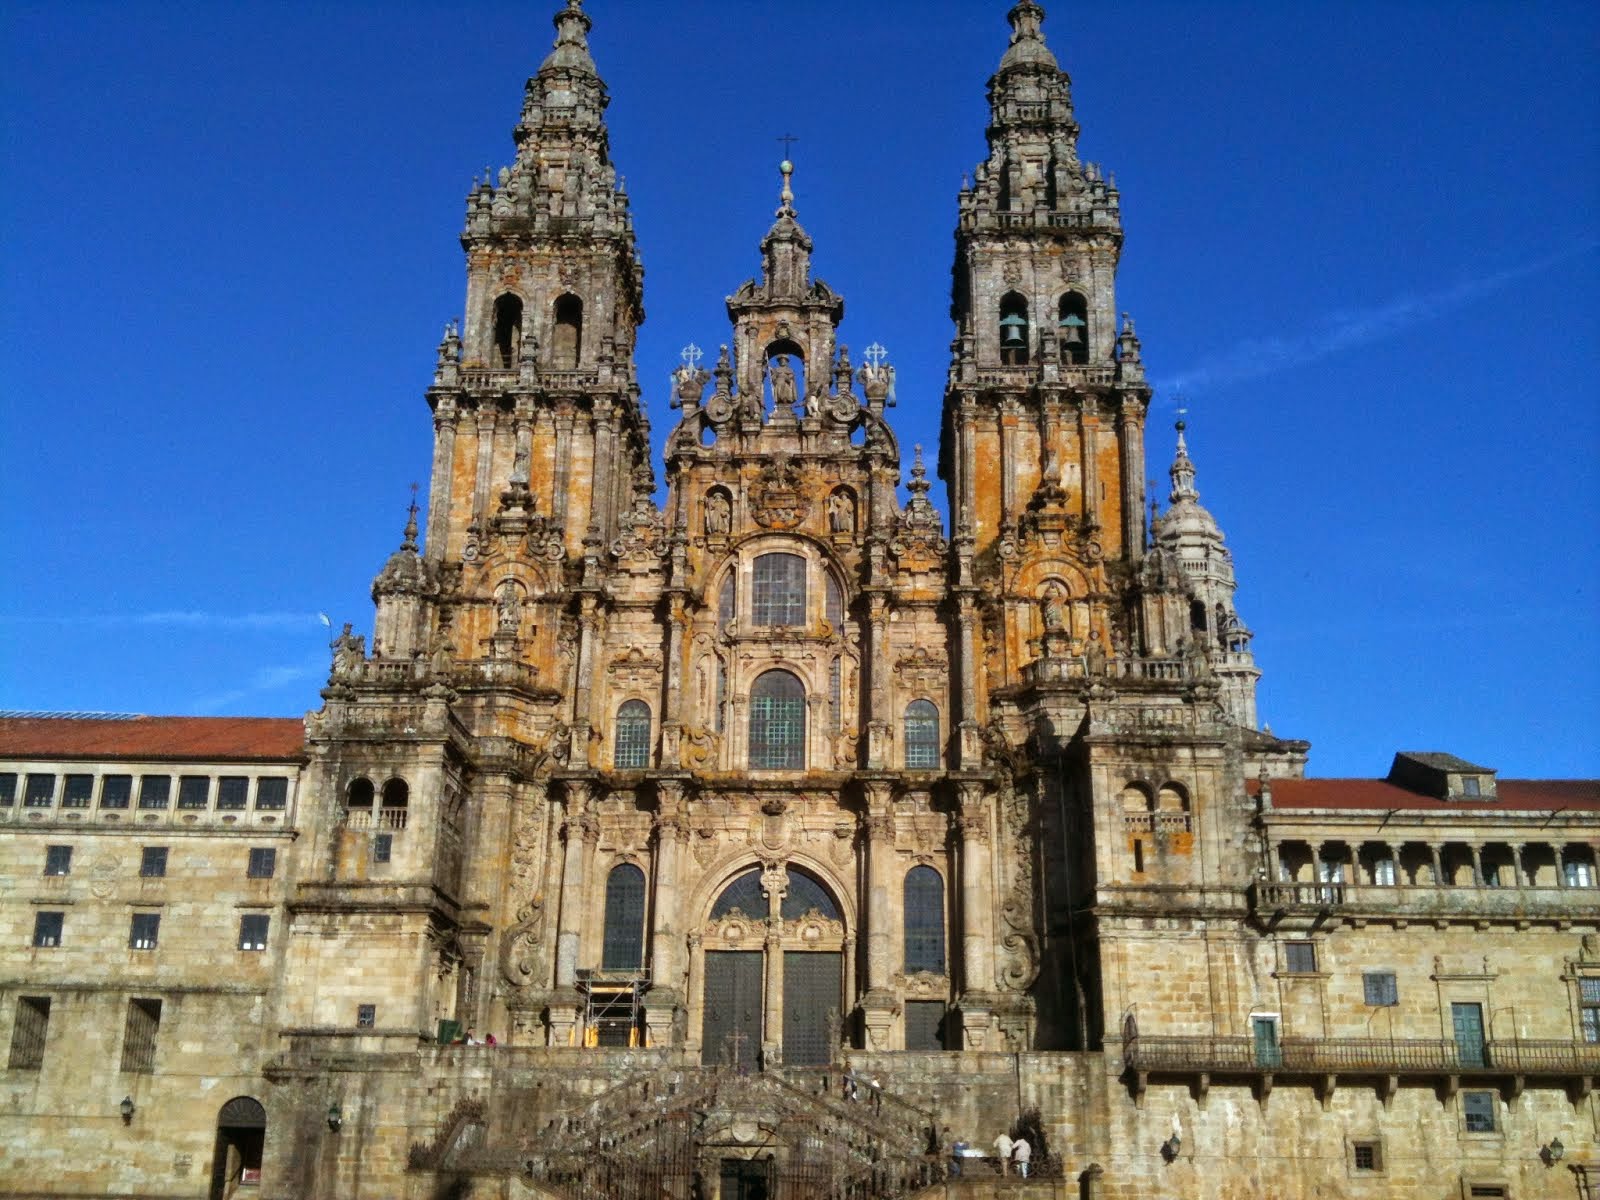 The Santiago Cathedral